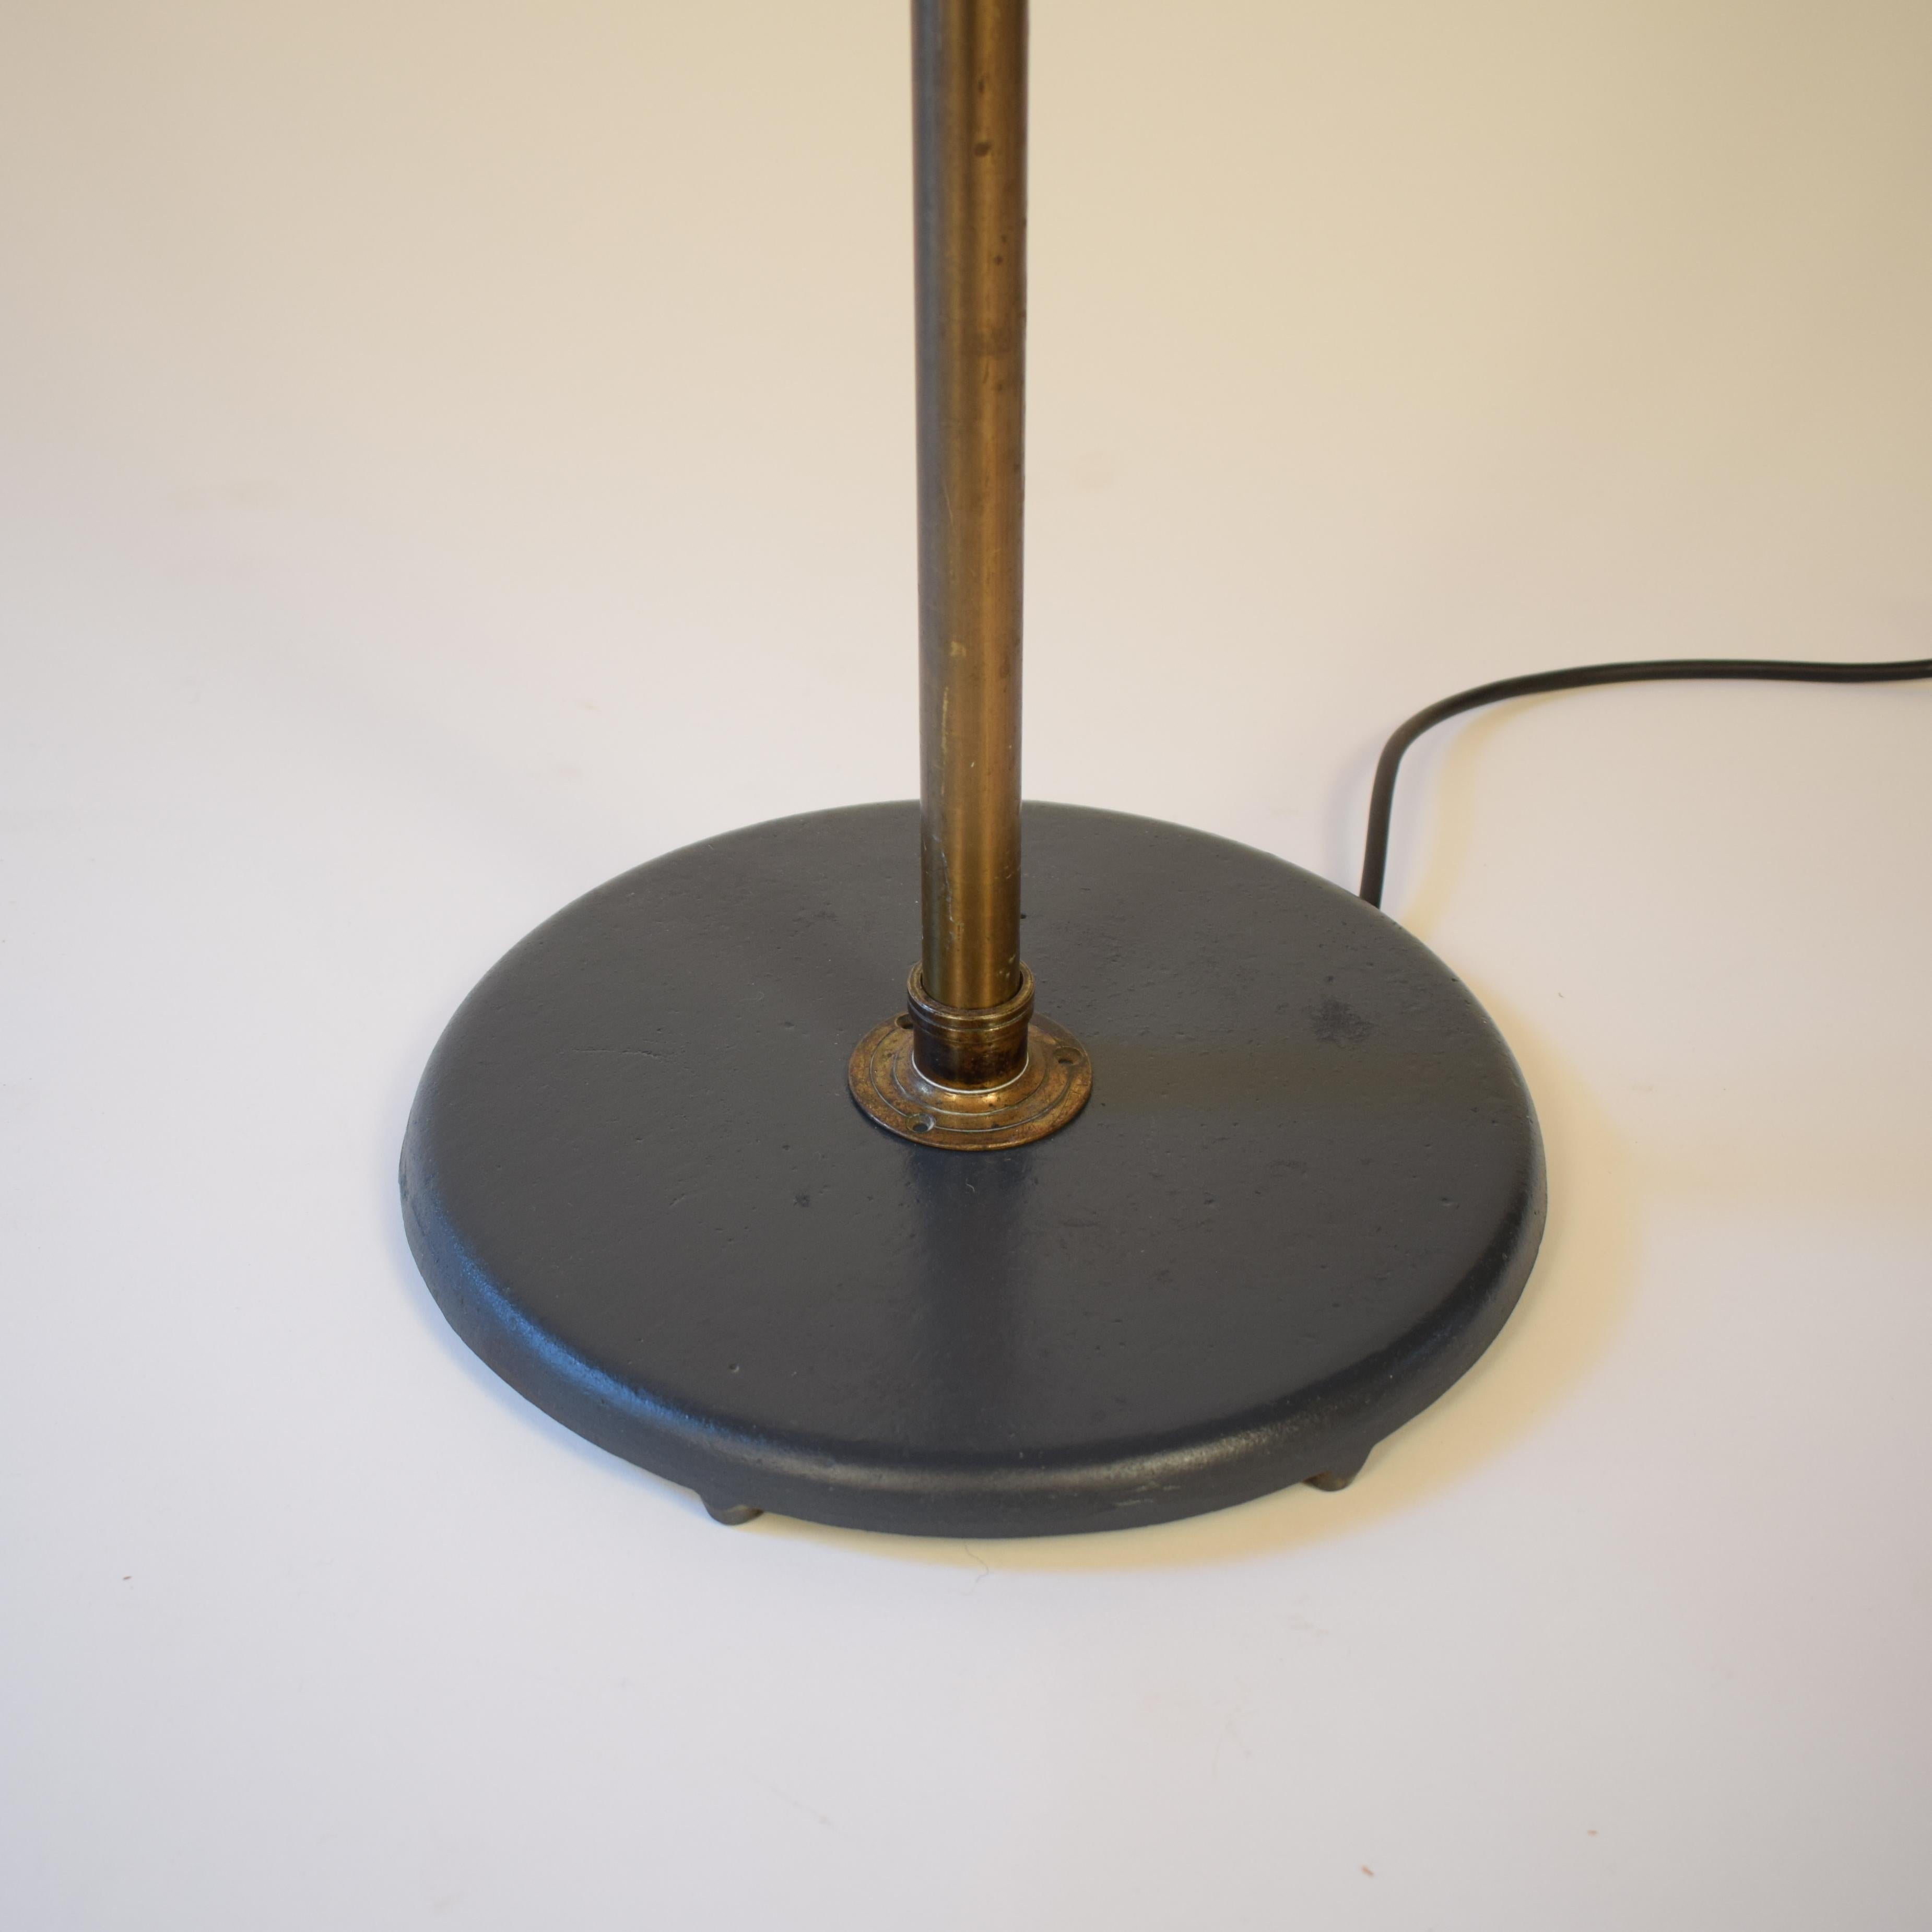 This beautiful industrial floor lamp is from the 1920s and was made in Germany.
The base and the top are made out of lacquered metal and the middle part is made out of brass.
It gives a nice and warm light.